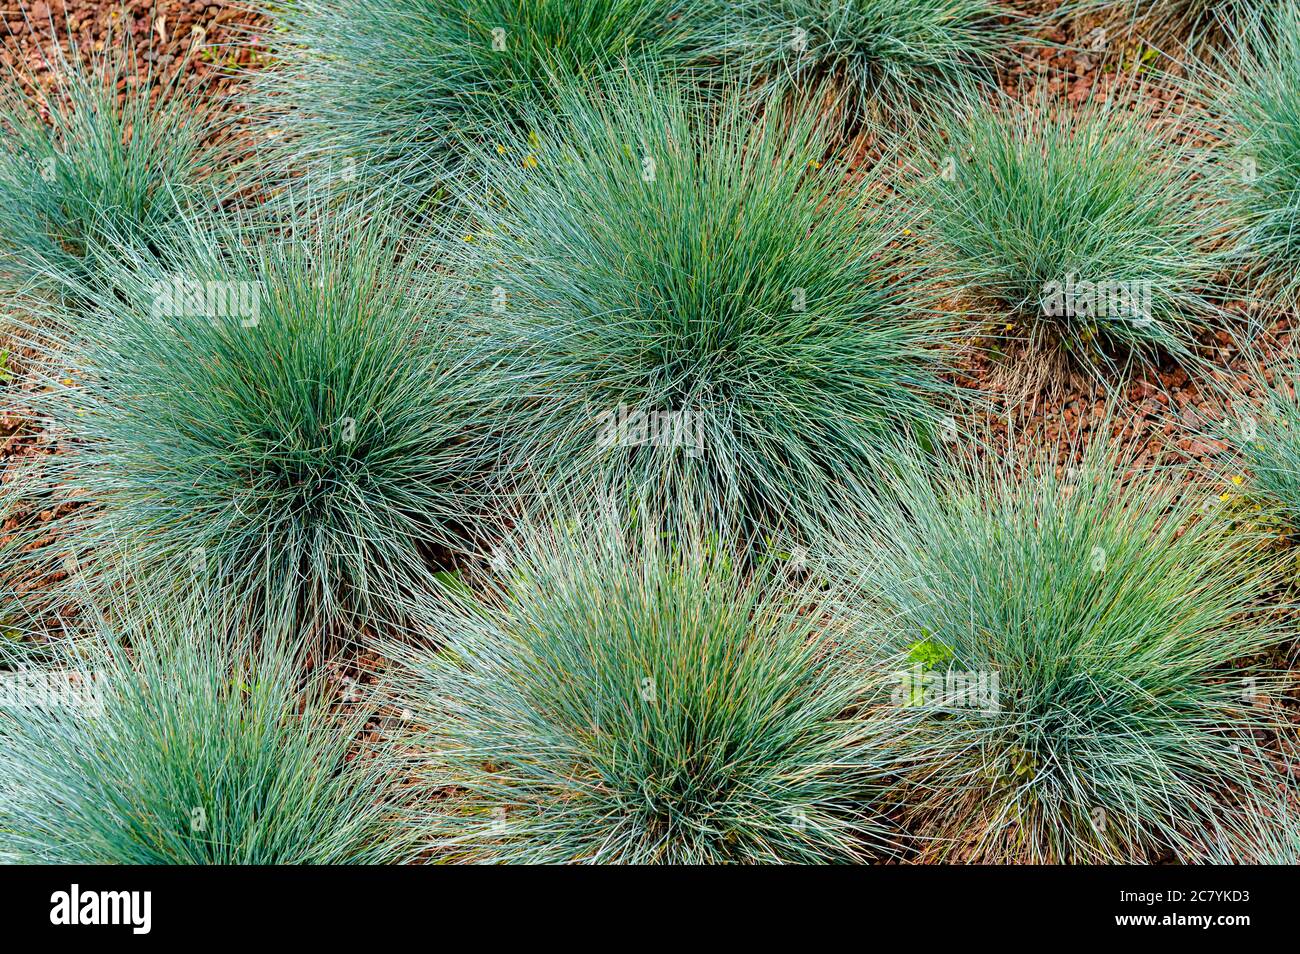 festuca glauca, commonly known as blue fescue, is a species of